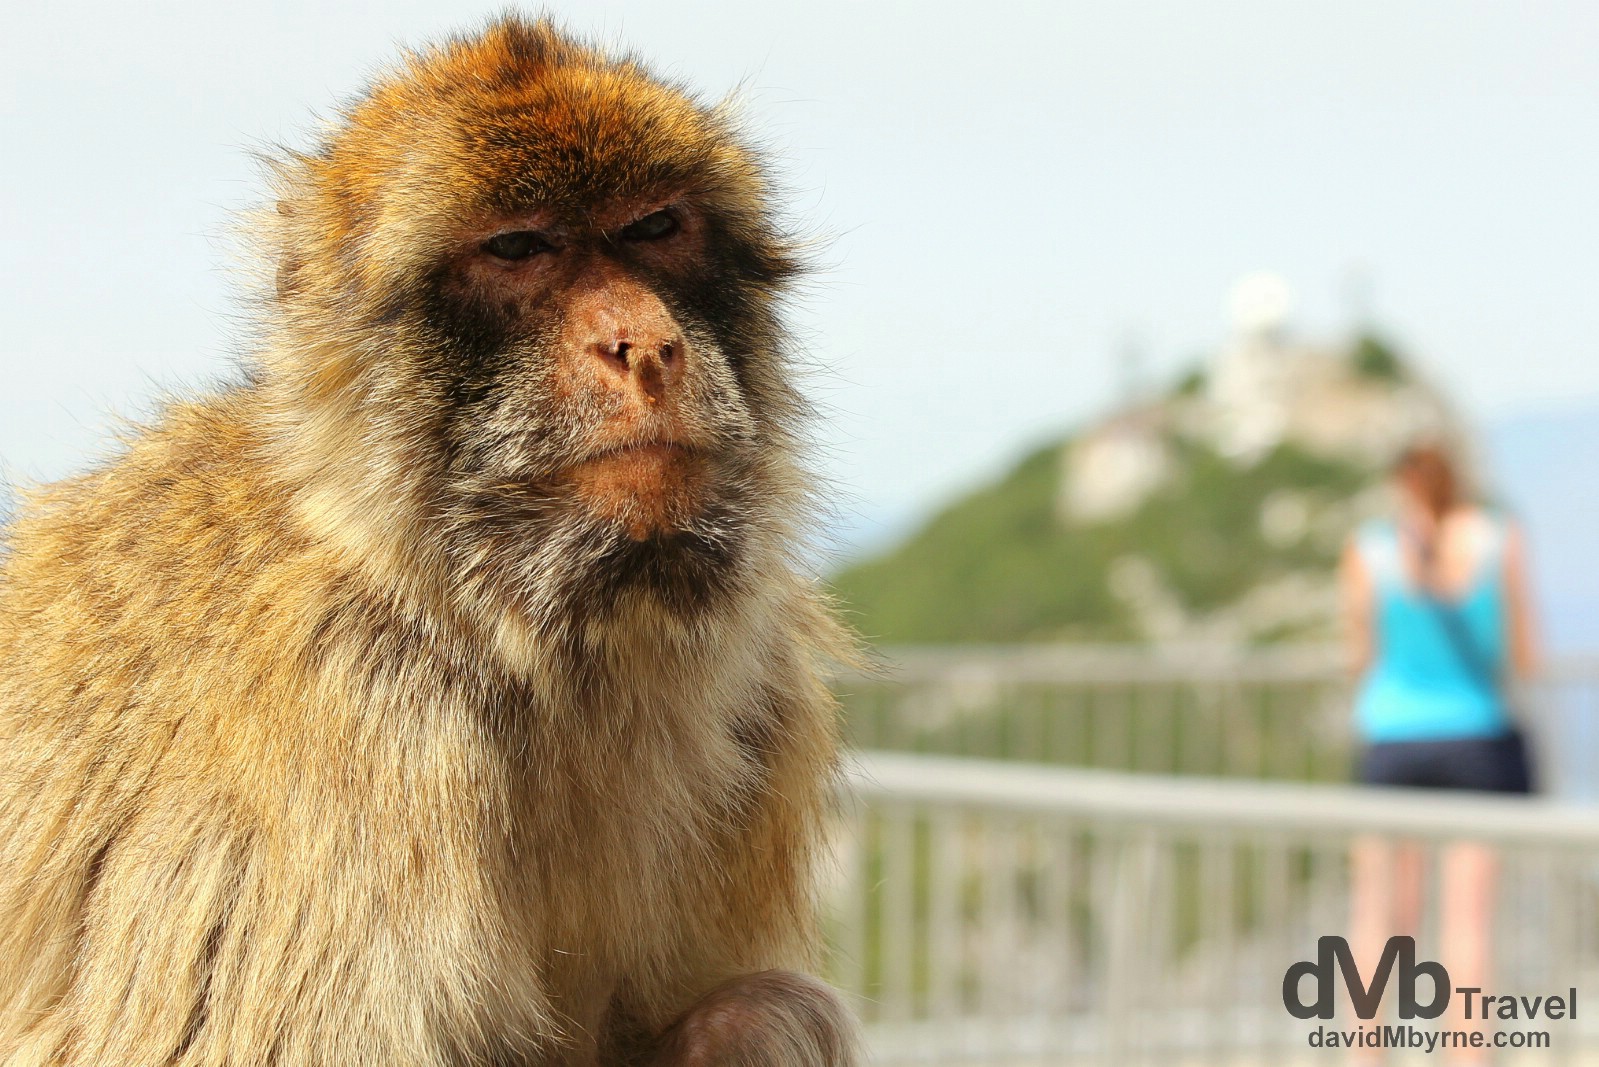 A resident Macaque monkey at The Top of The Rock viewing deck in Gibraltar. June 5th, 2014.